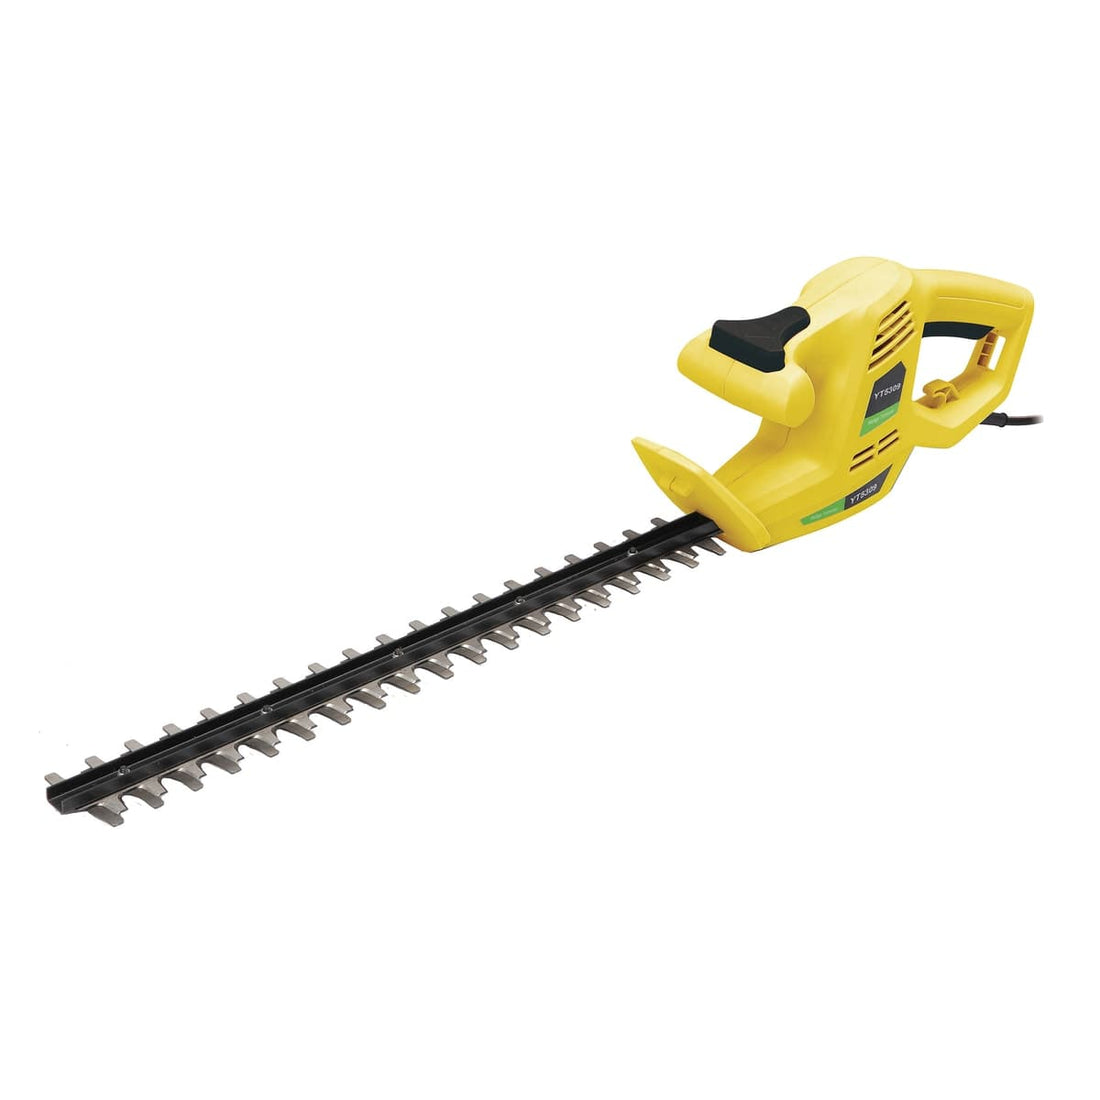 HT4502 ELECTRIC HEDGE TRIMMER - best price from Maltashopper.com BR500007018